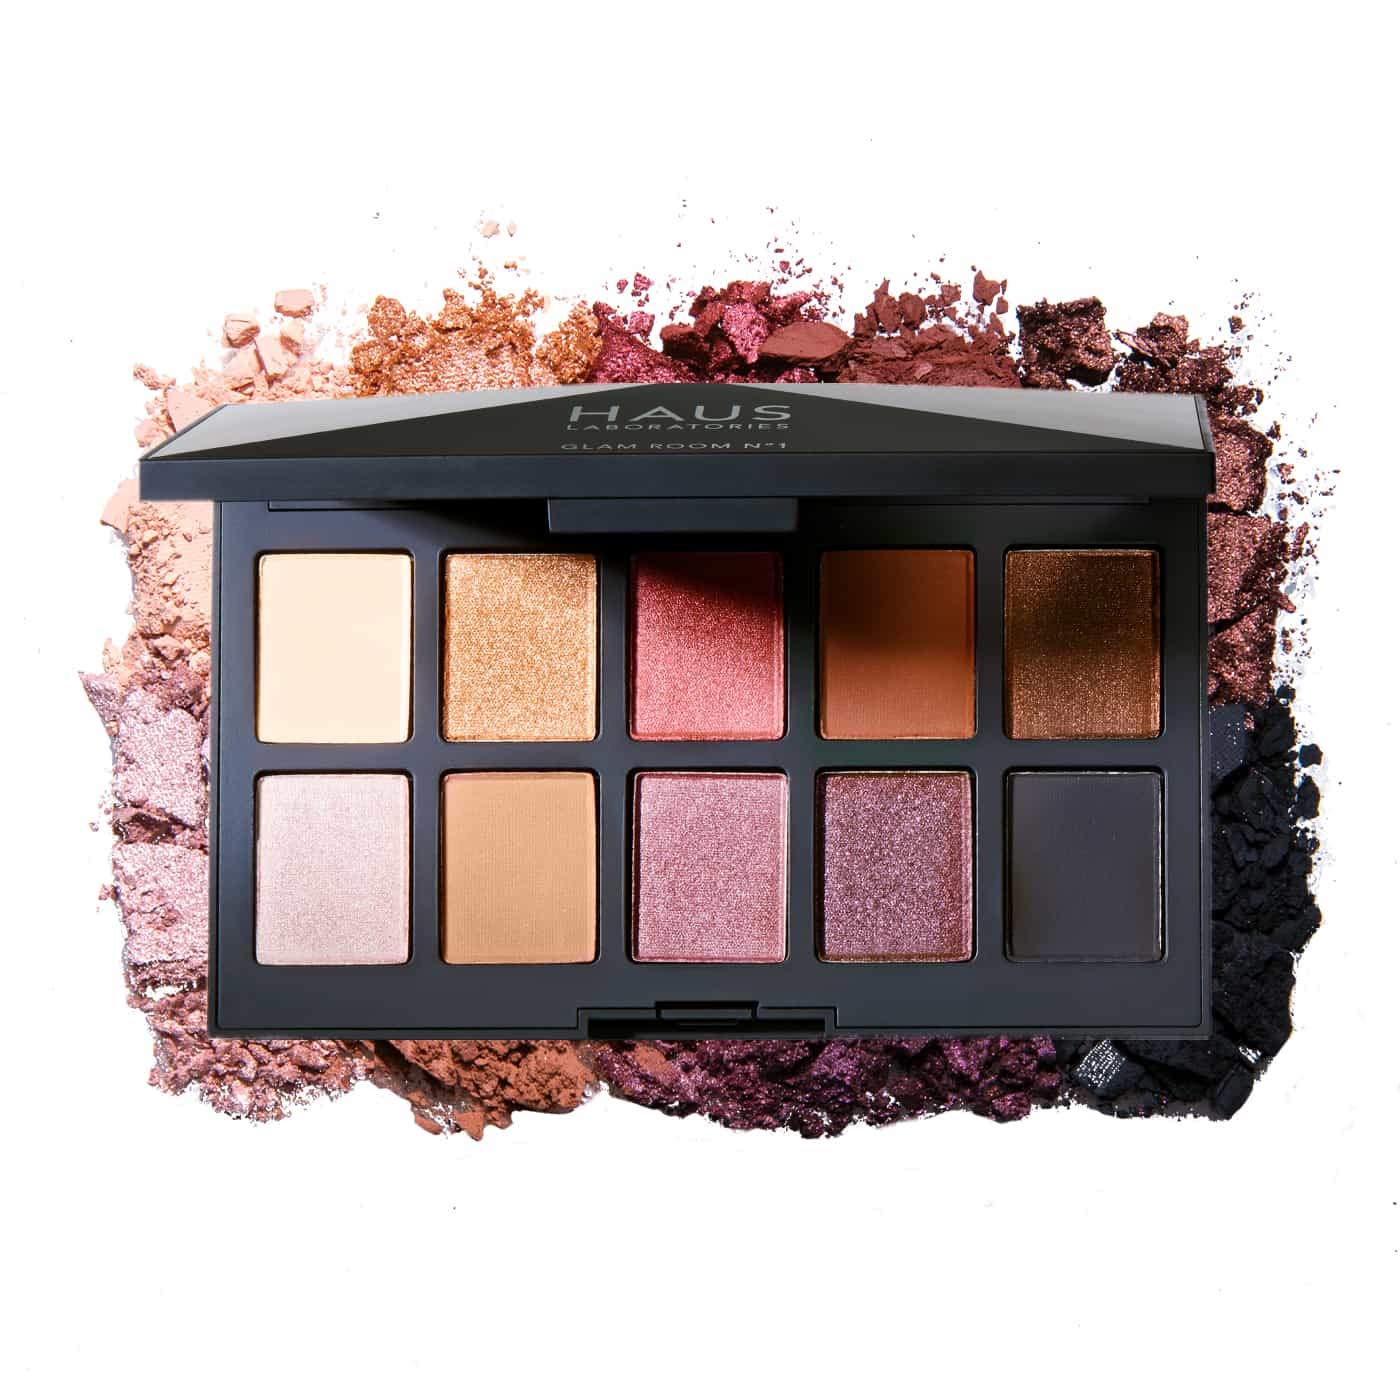 Haus Laboratories By Lady Gaga: 10-Shade Glam Room Eyeshadow Palette No.1 (Fame) $13.60 + Free S&H w/ Prime or $25+